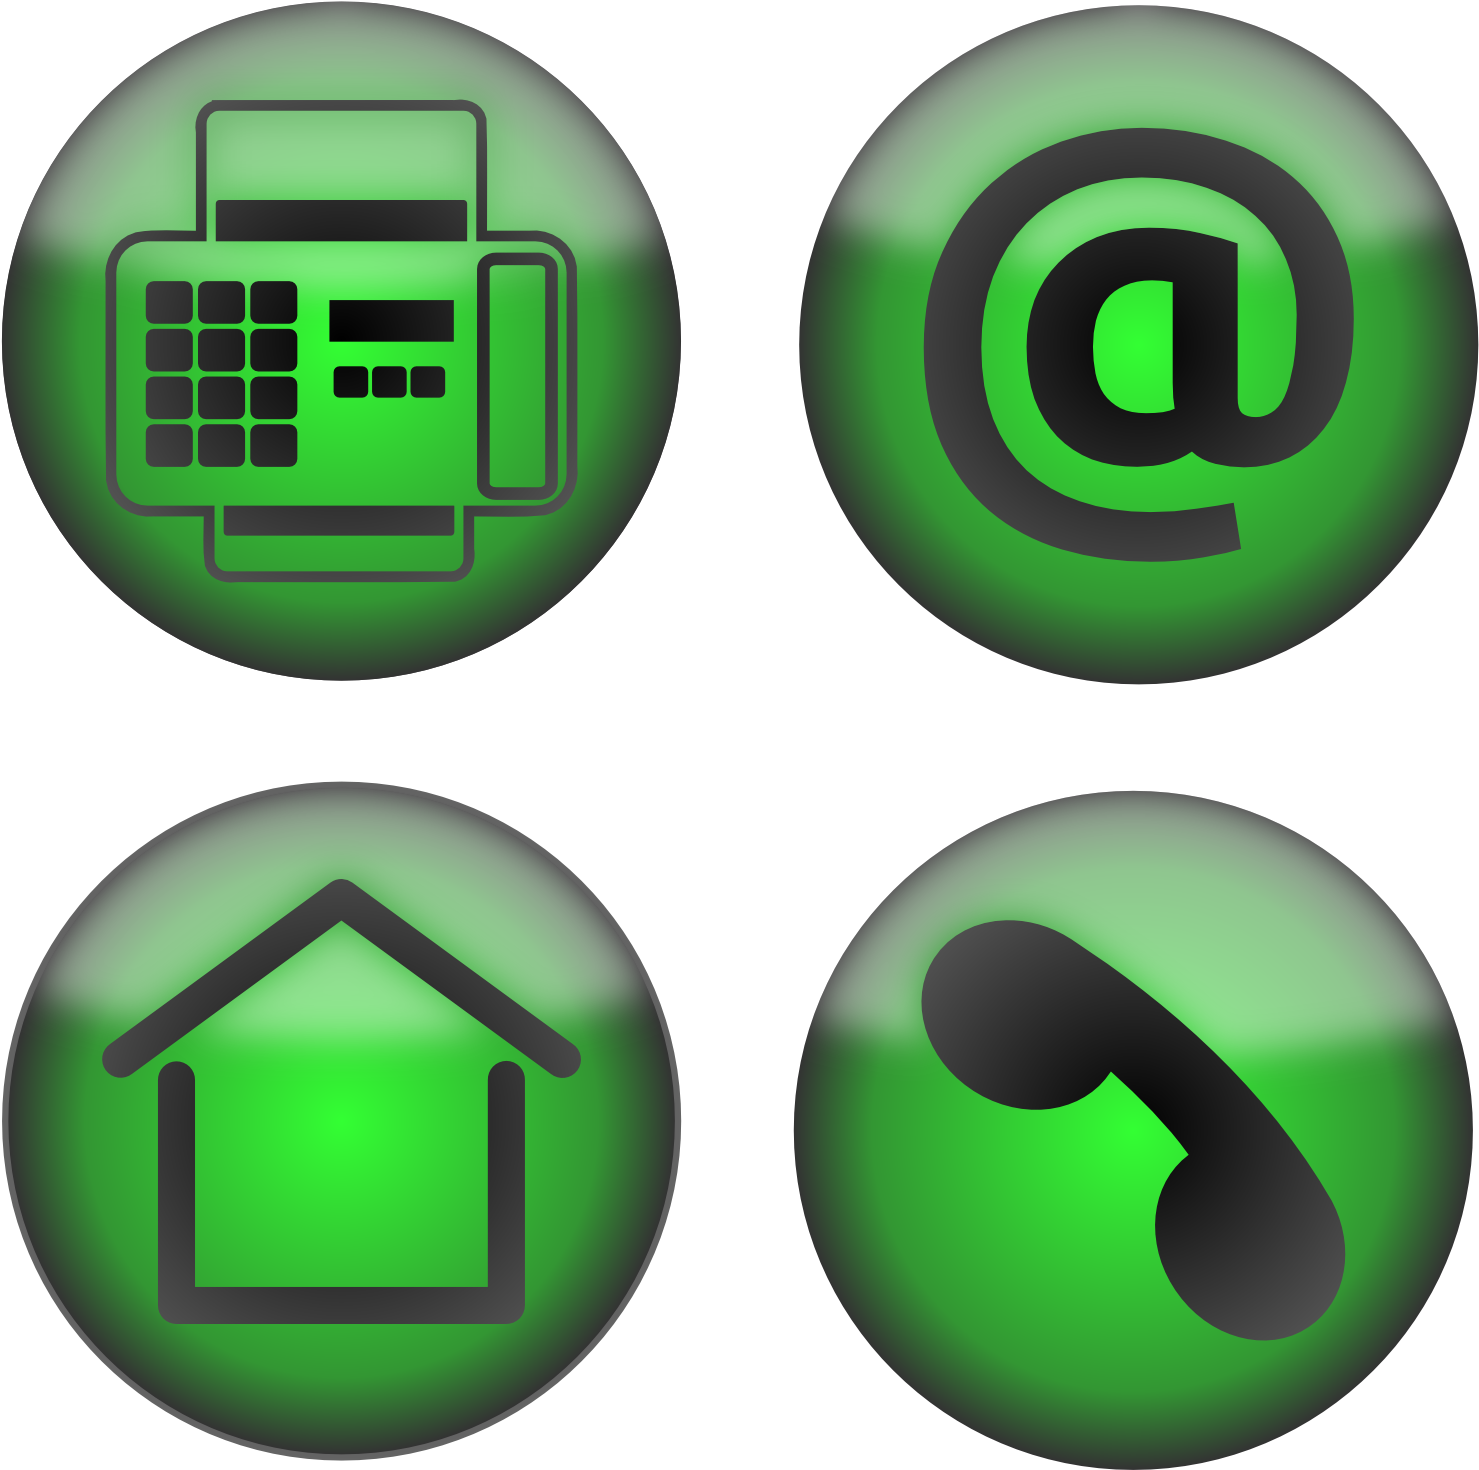 Telephone Icons Images - Telephone Fax Email Icons (1589x1572)